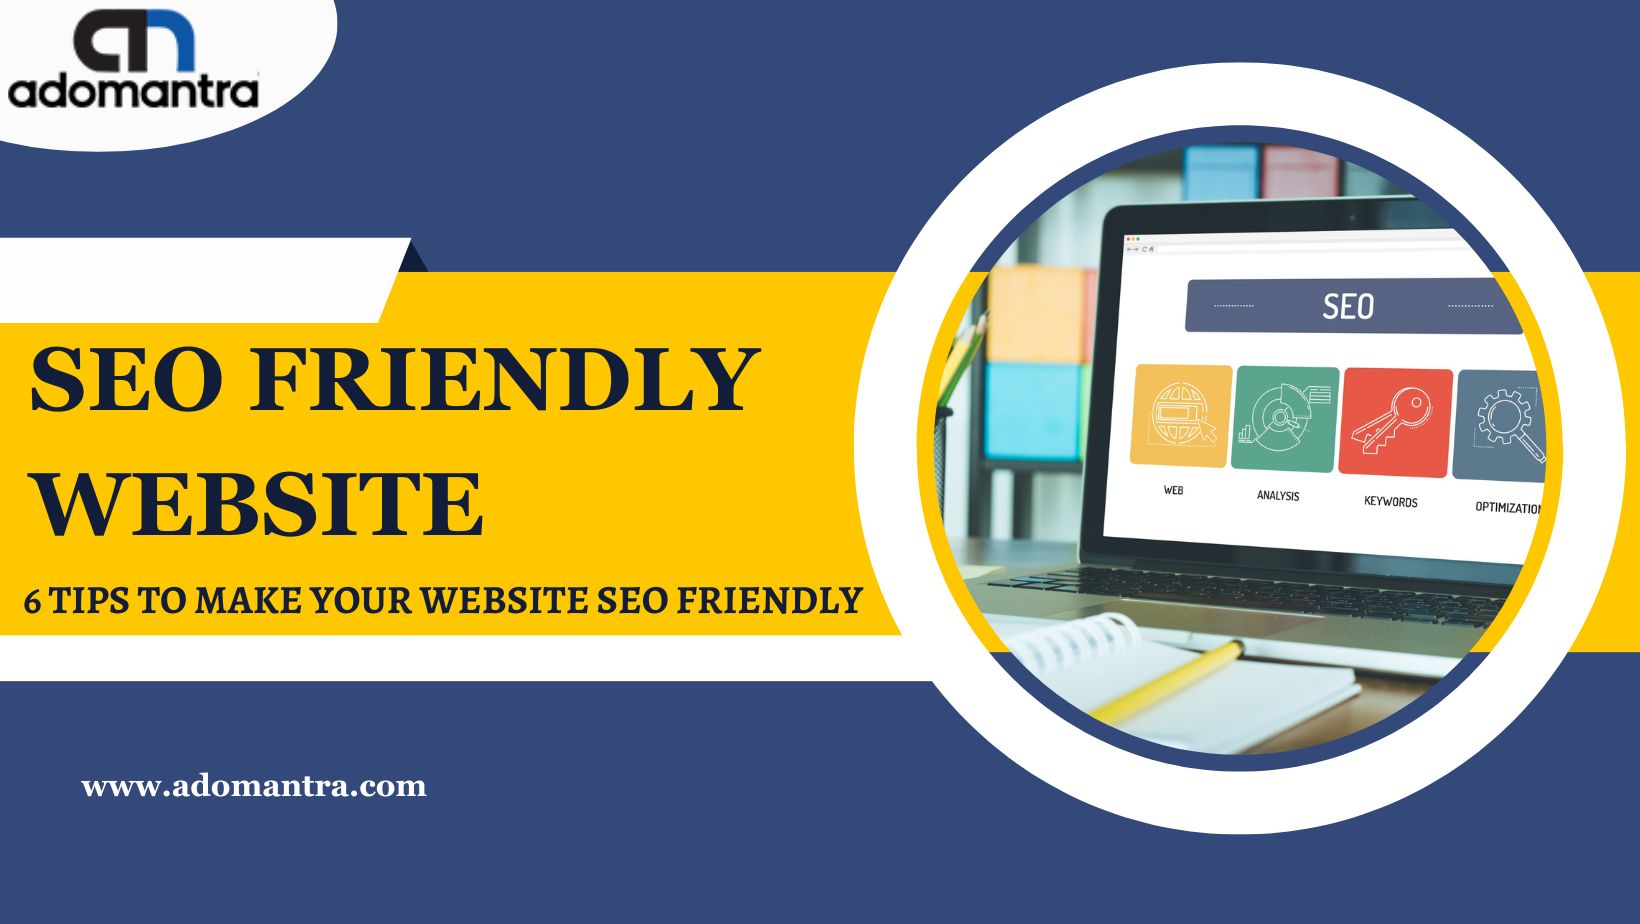 SEO Friendly Website: 6 Tips to Make Your Website SEO Friendly